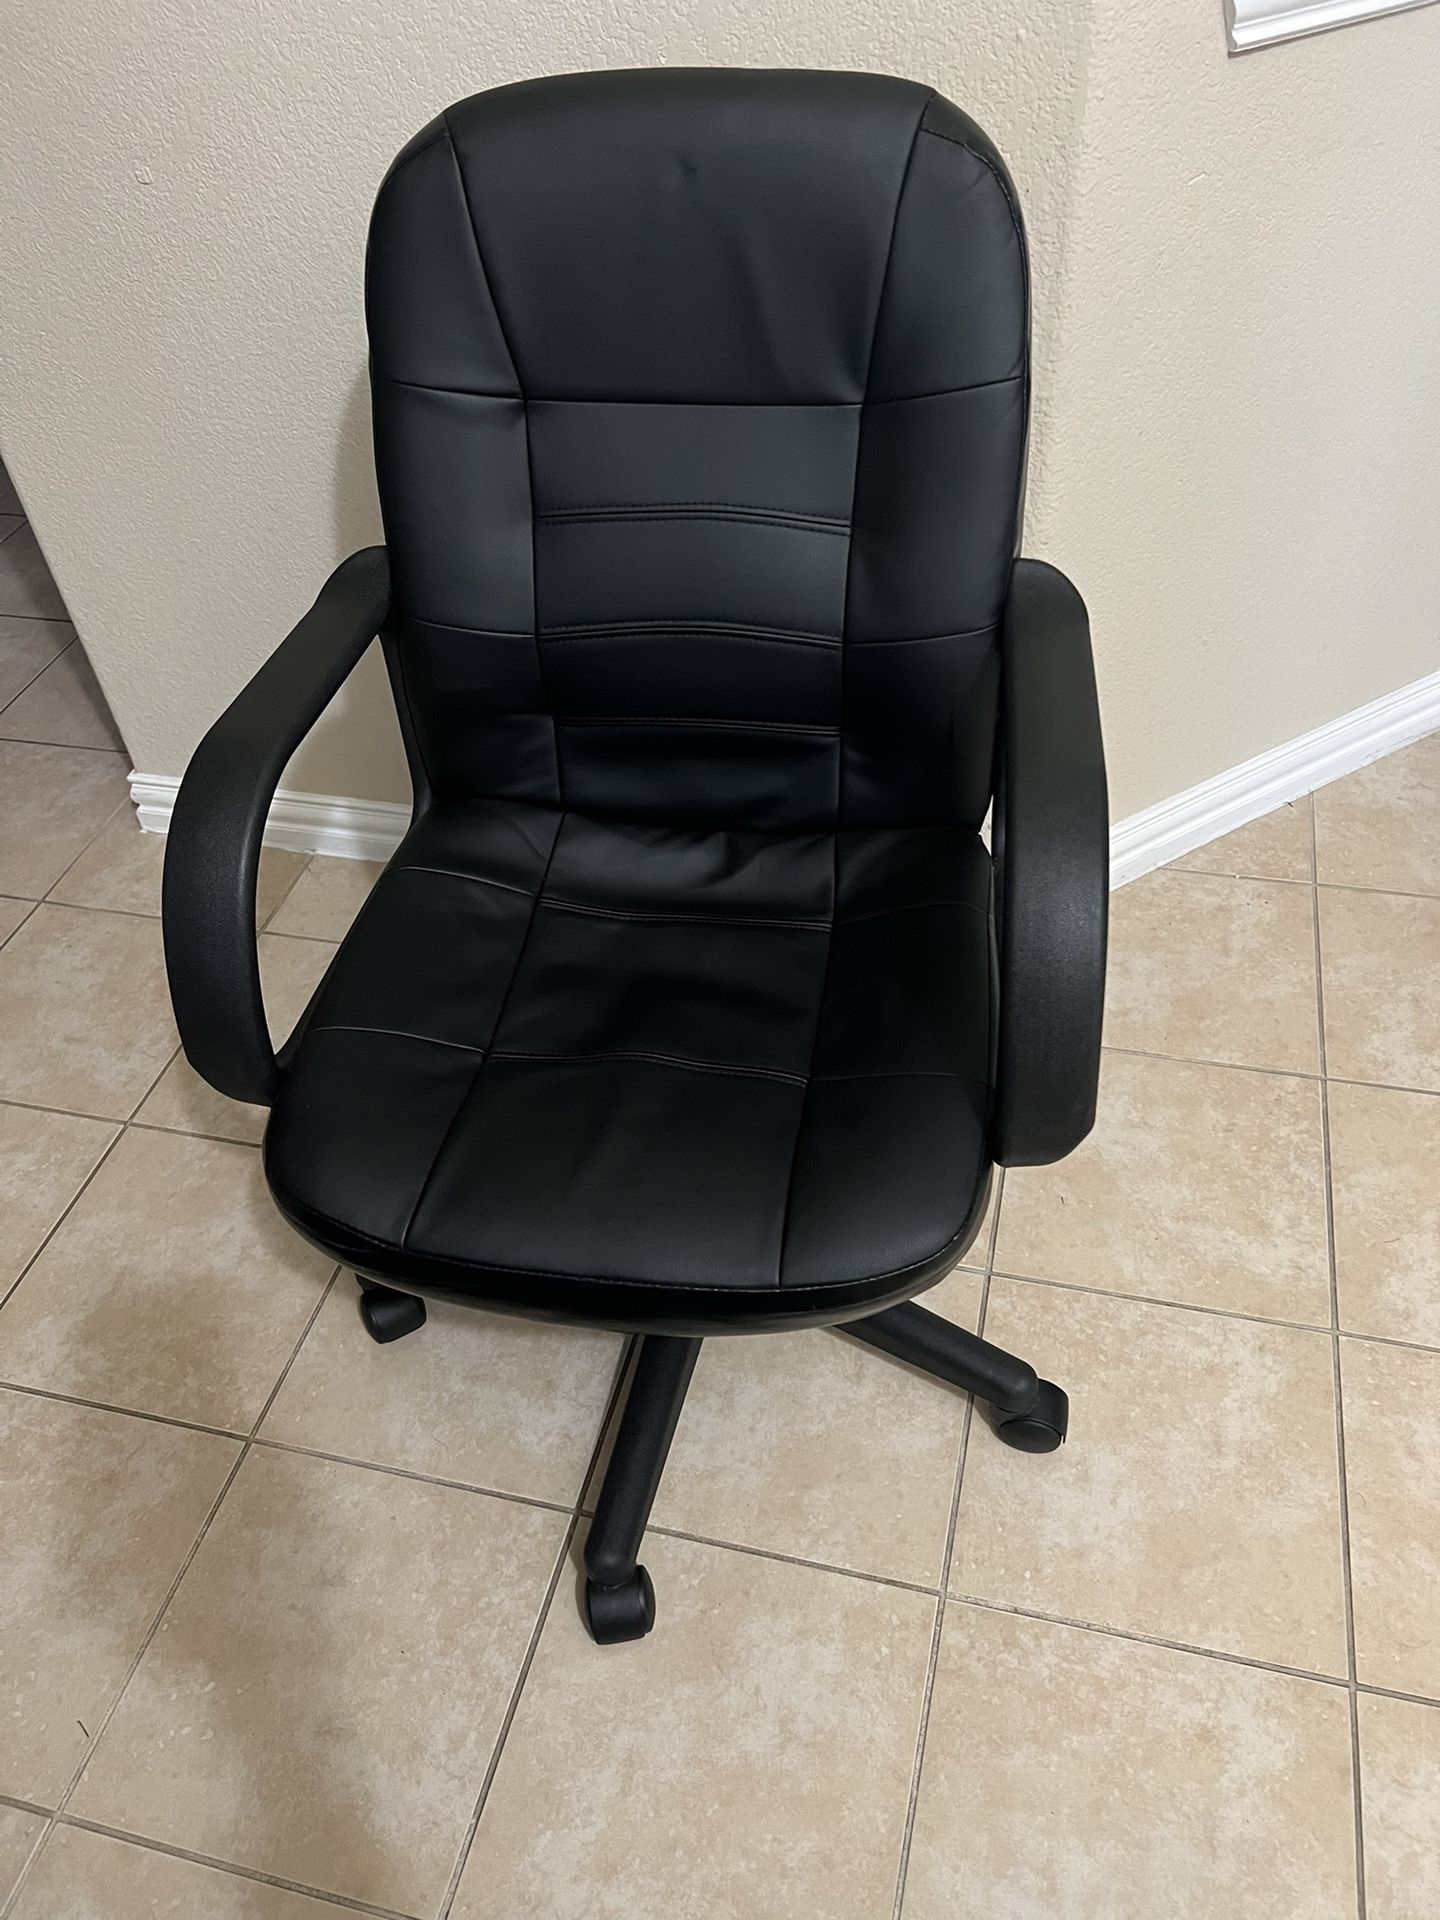 Office chair $40